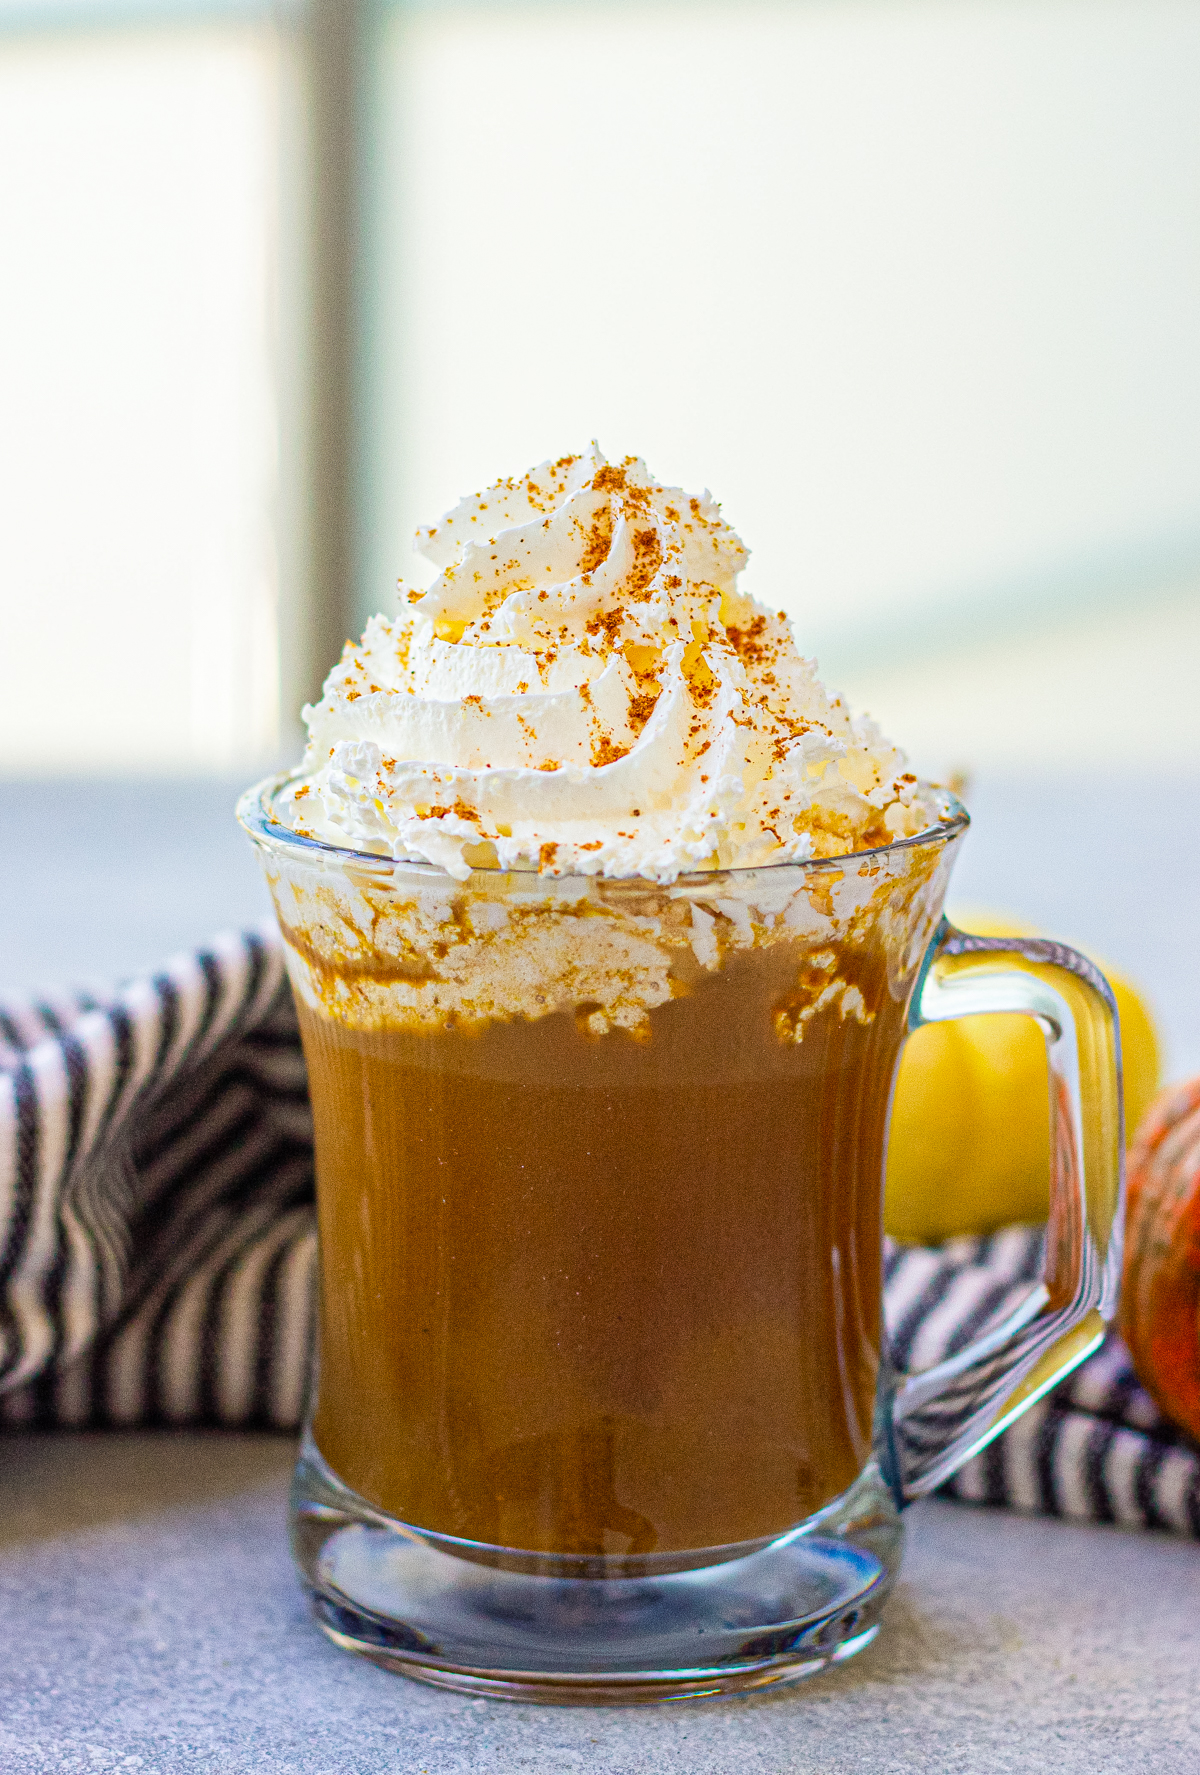 delicious copycat starbucks pumpkin spice latte with whipped cream topping in a glass mug